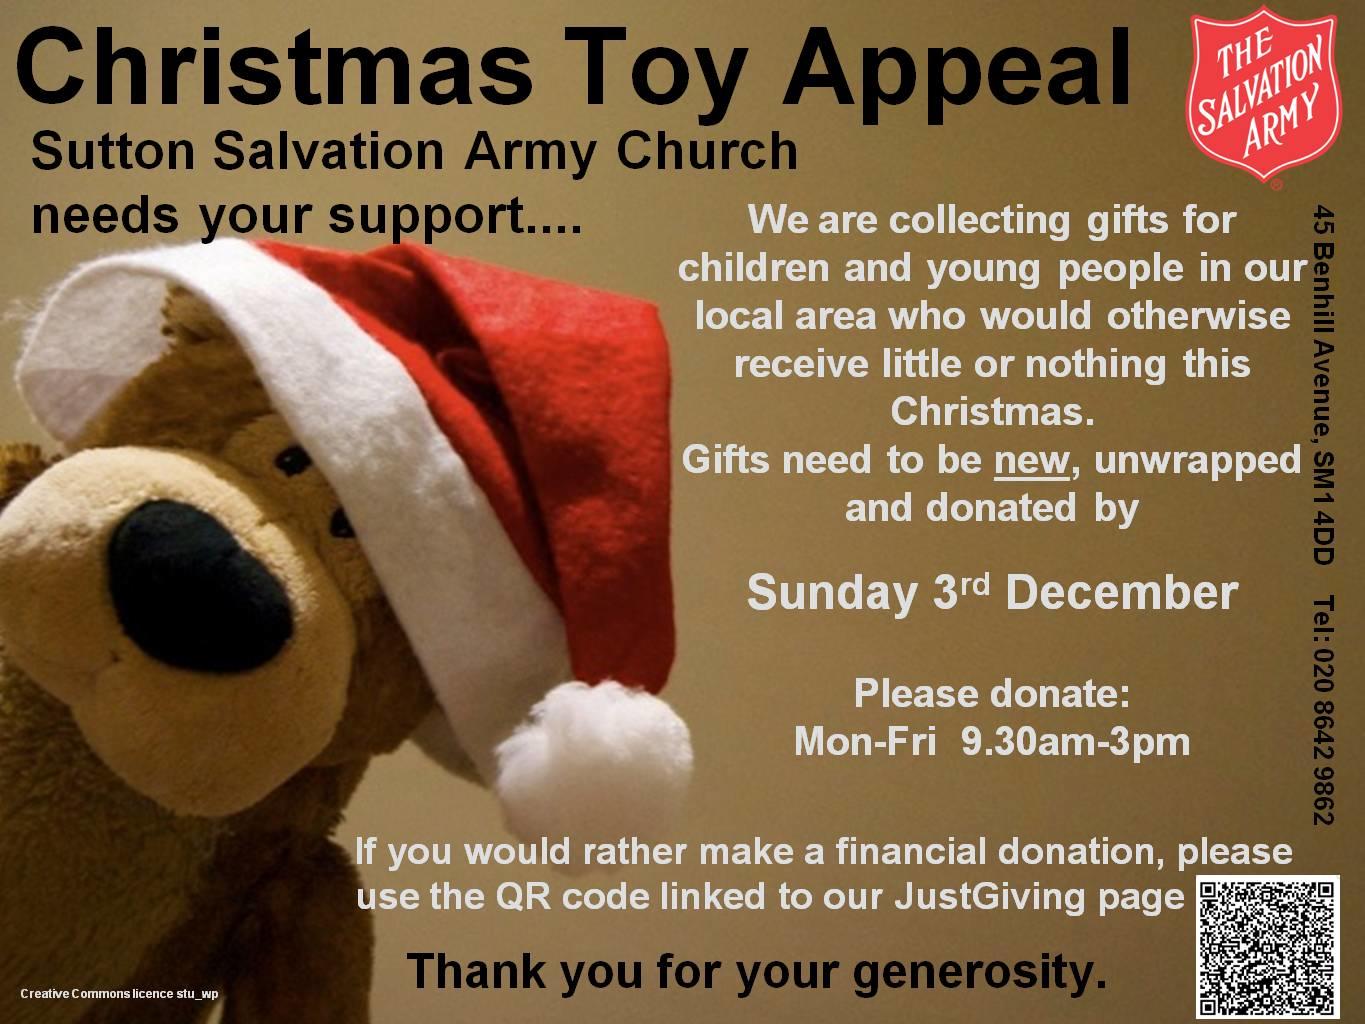 A teddy bear with a Santa Claus hat and information relating to their Christmas Toy Appeal